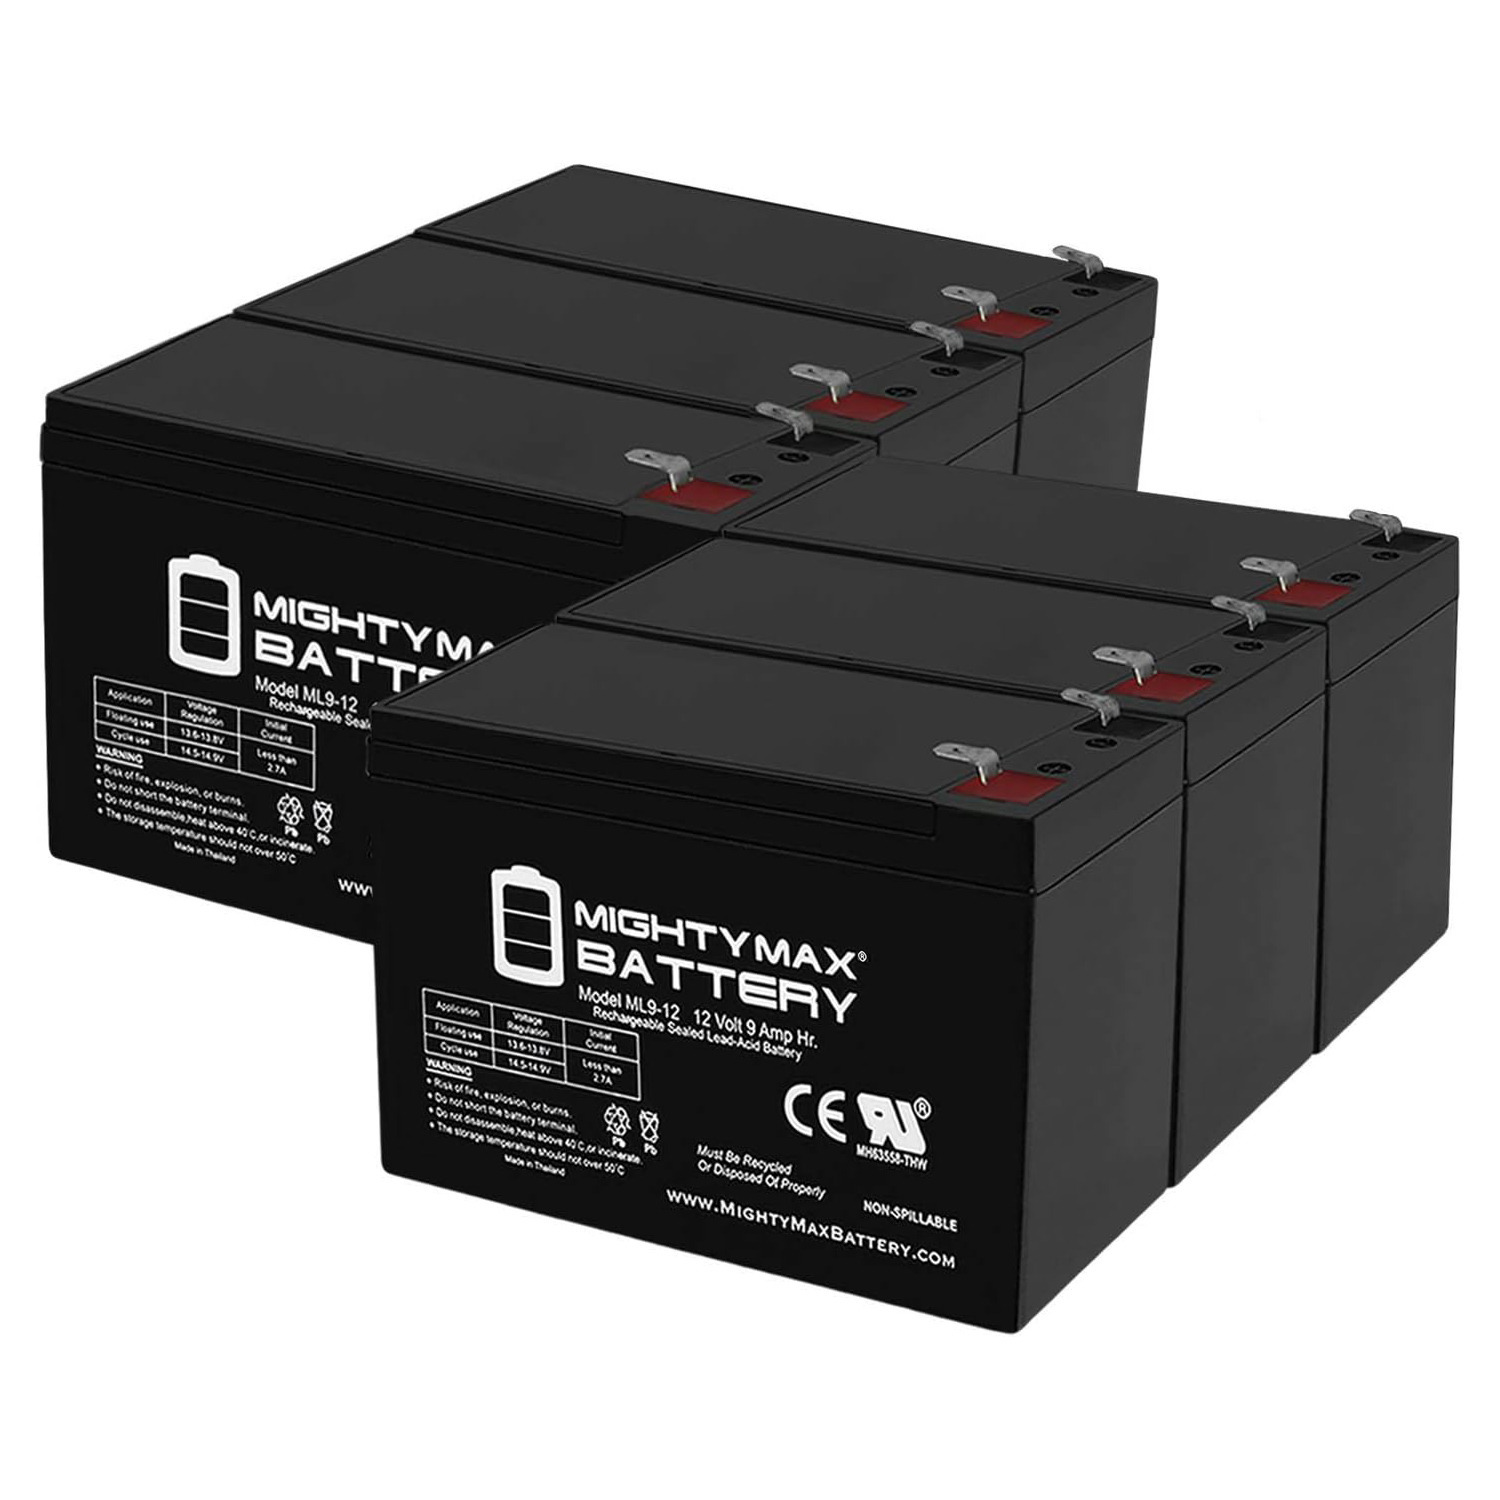 Altronix SMP5PMCTXPD16 12V, 9Ah Lead Acid Battery - 6 Pack